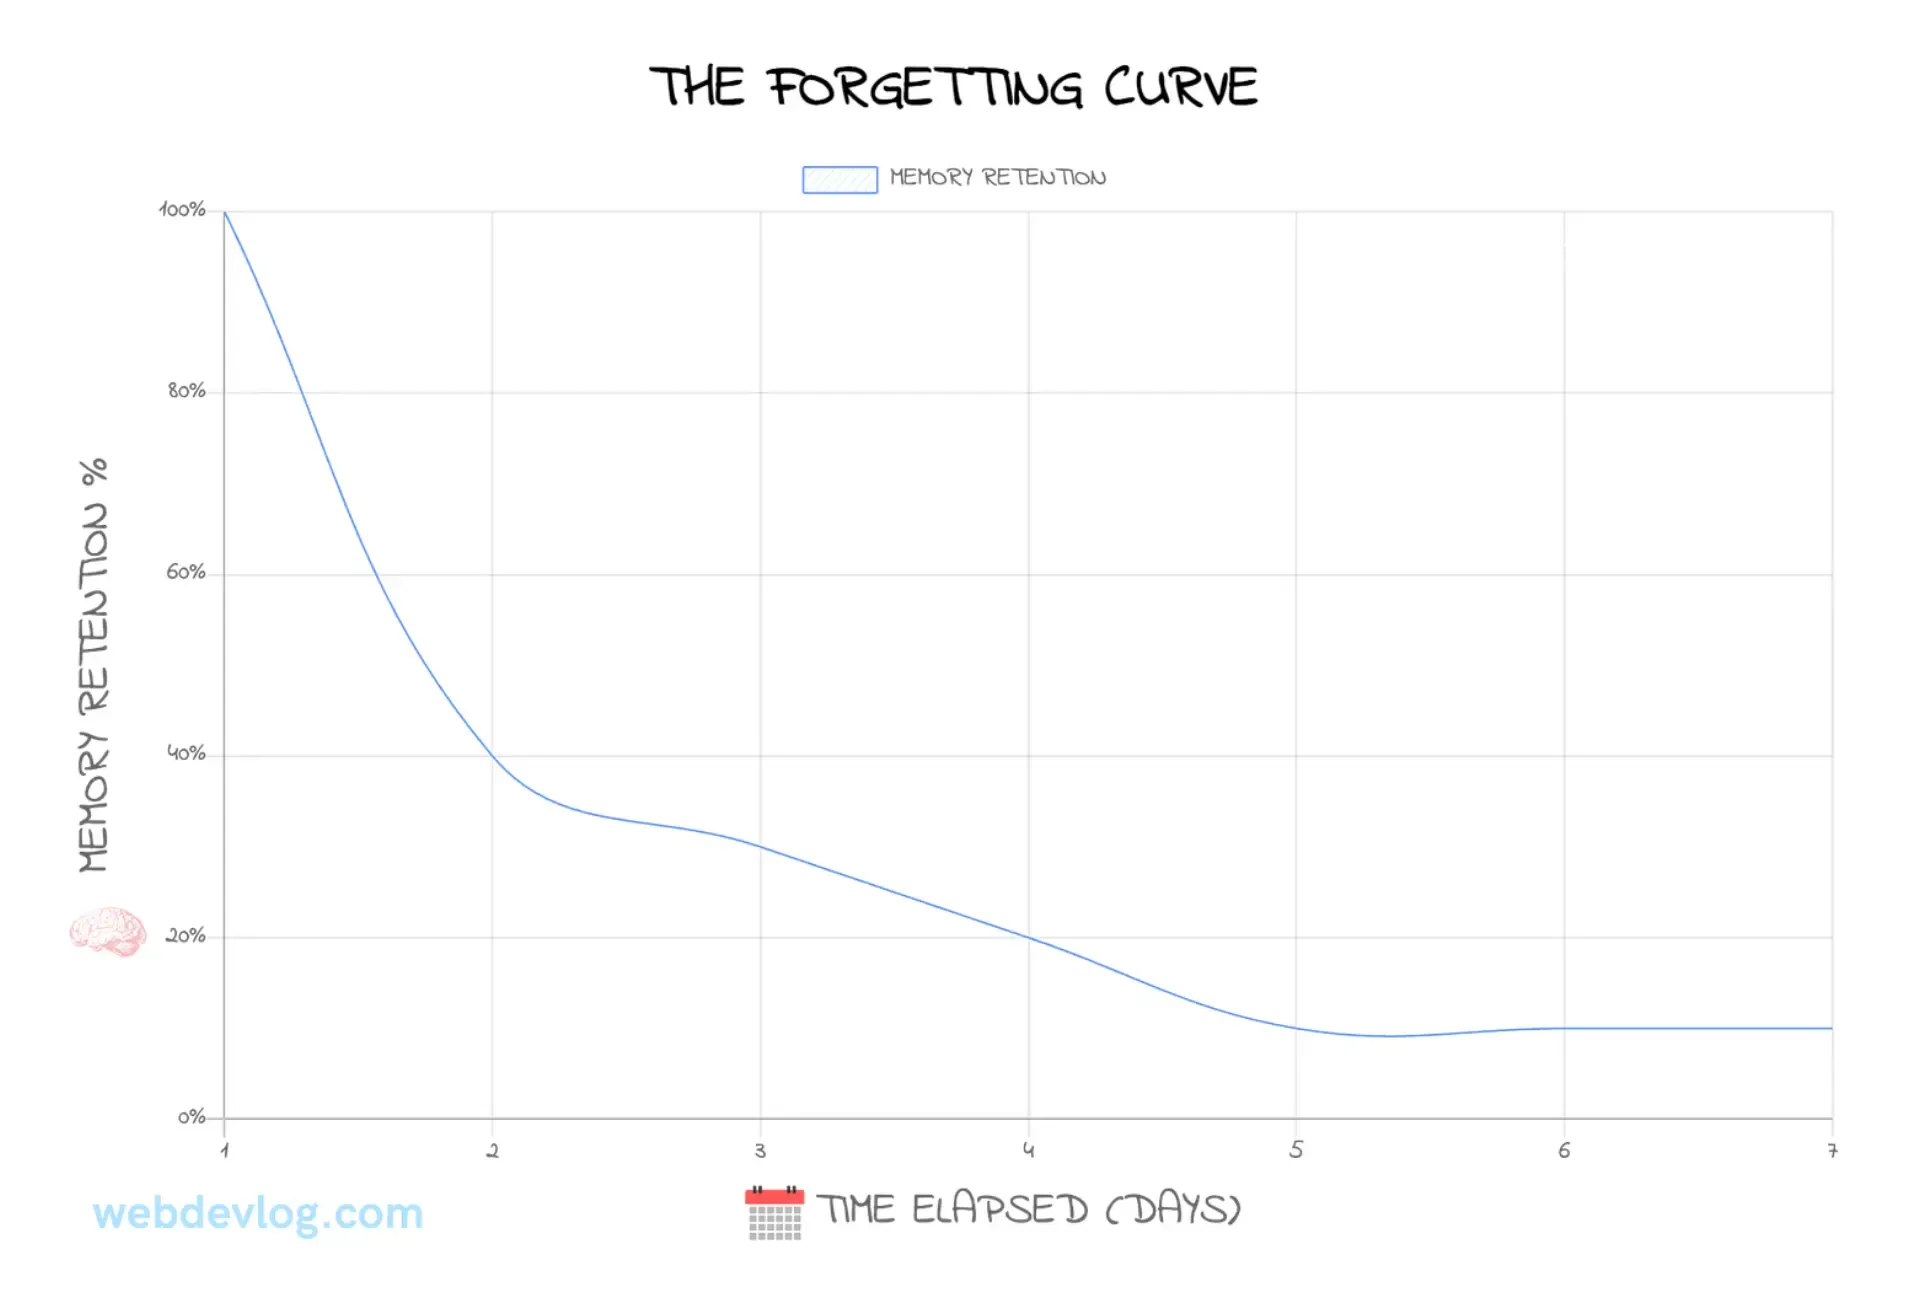 The forgetting curve